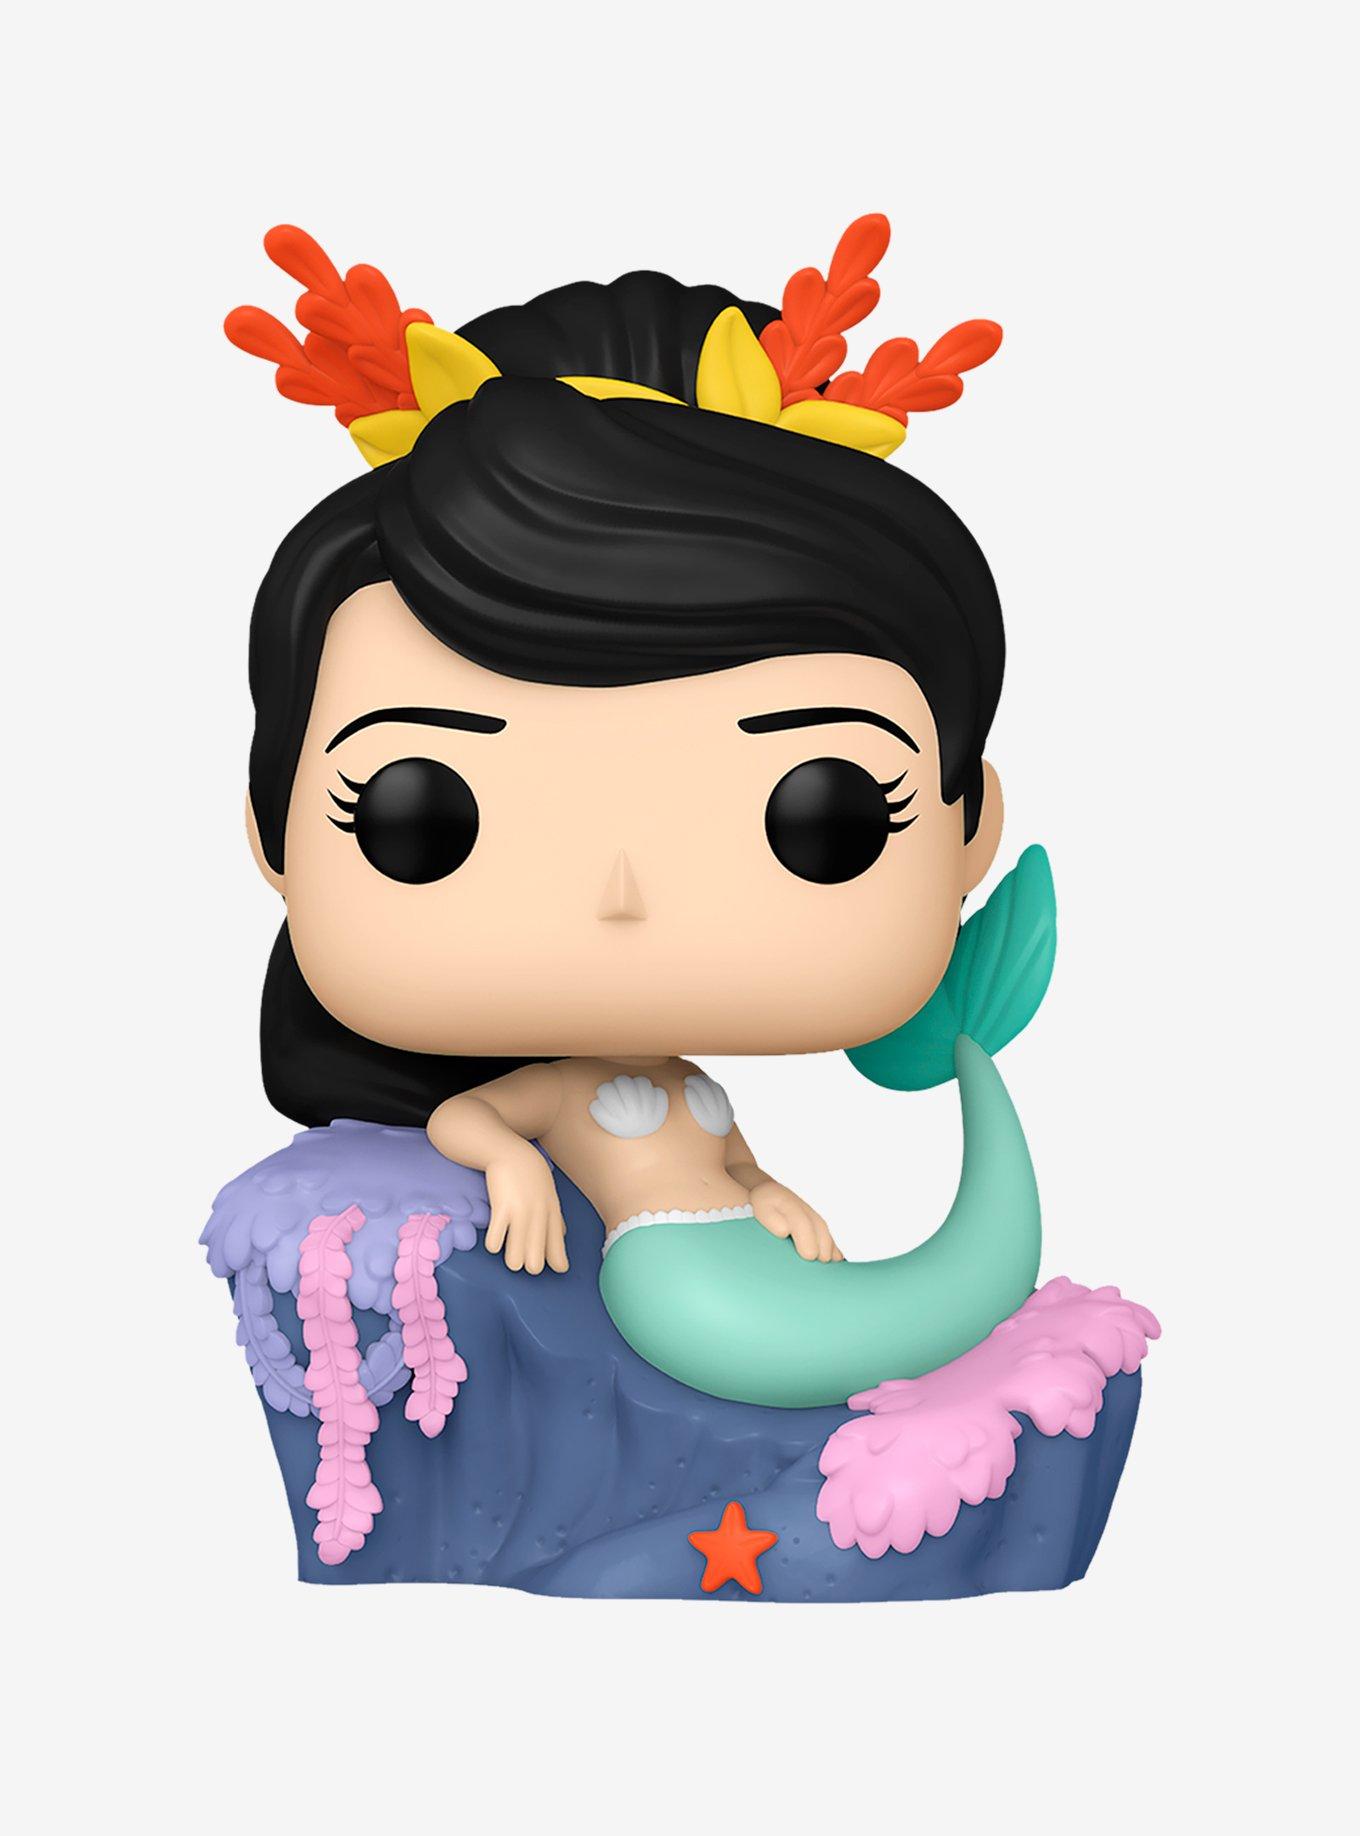 New Disney Funko Pop Pre-Orders: Ultimate Princess, Small World, and Luca